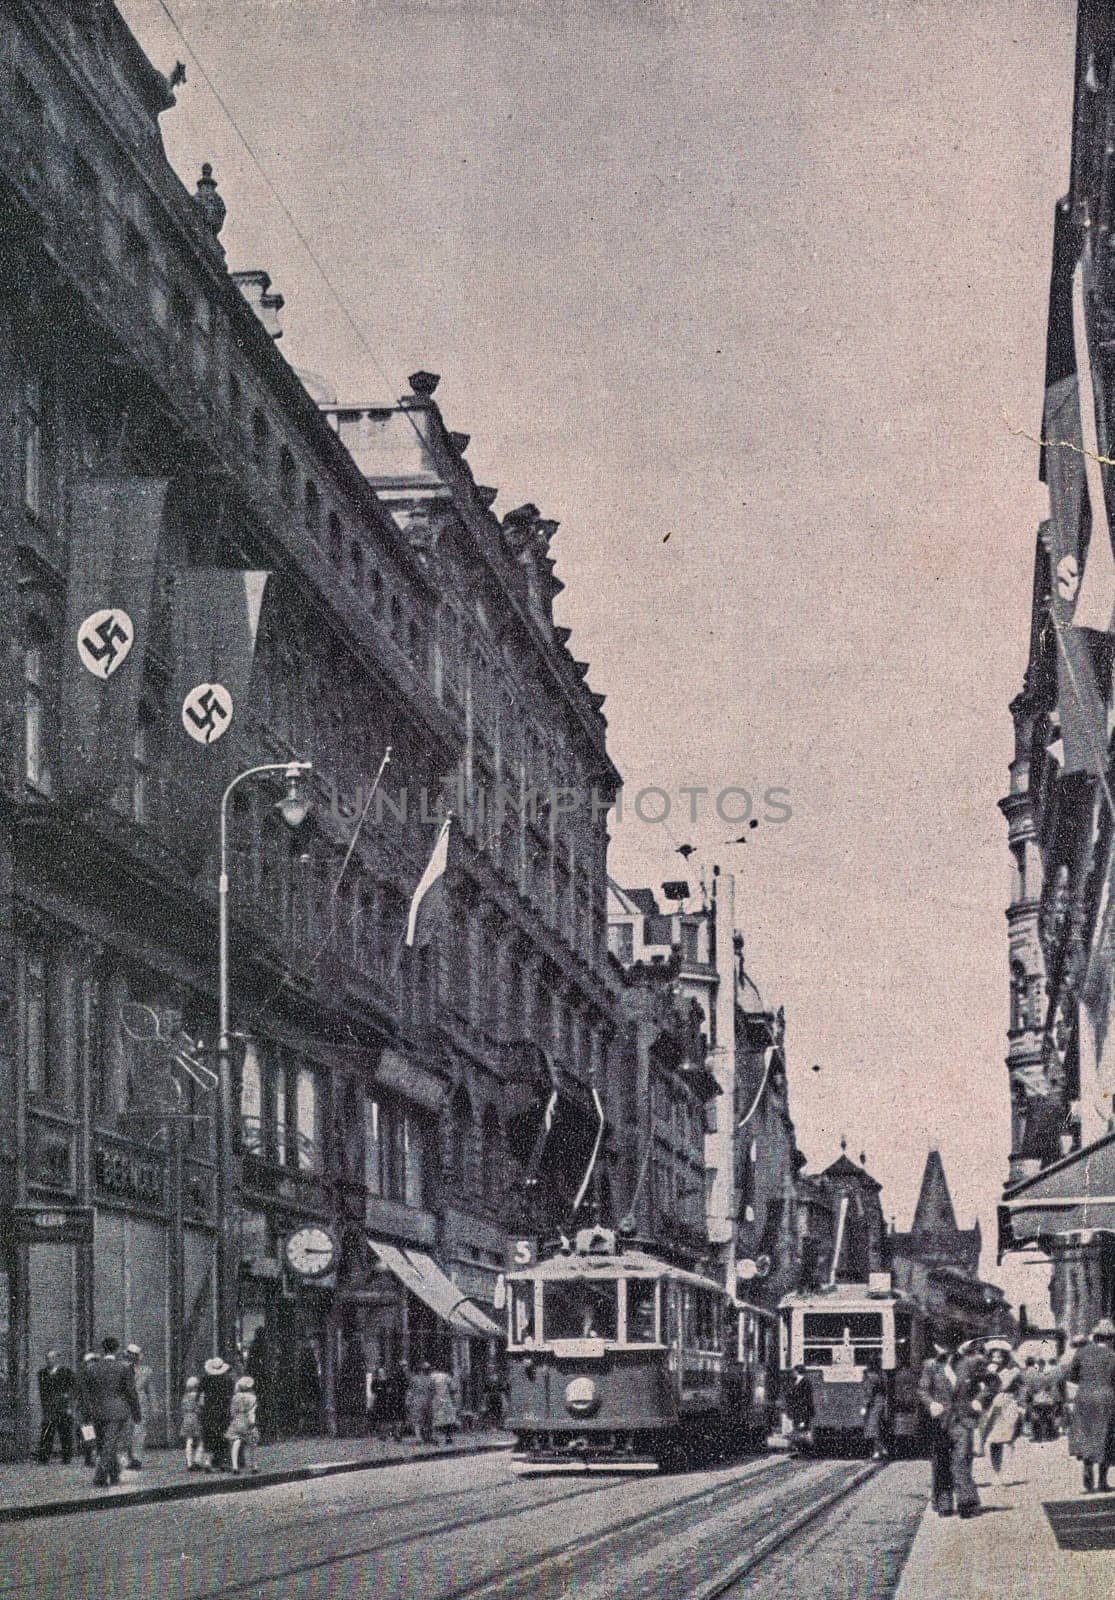 PRAGUE, PROTECTORATE OF BOHEMIA AND MORAVIA - 1942: Unkown street in Prague. Nazi Swastika flags on building.